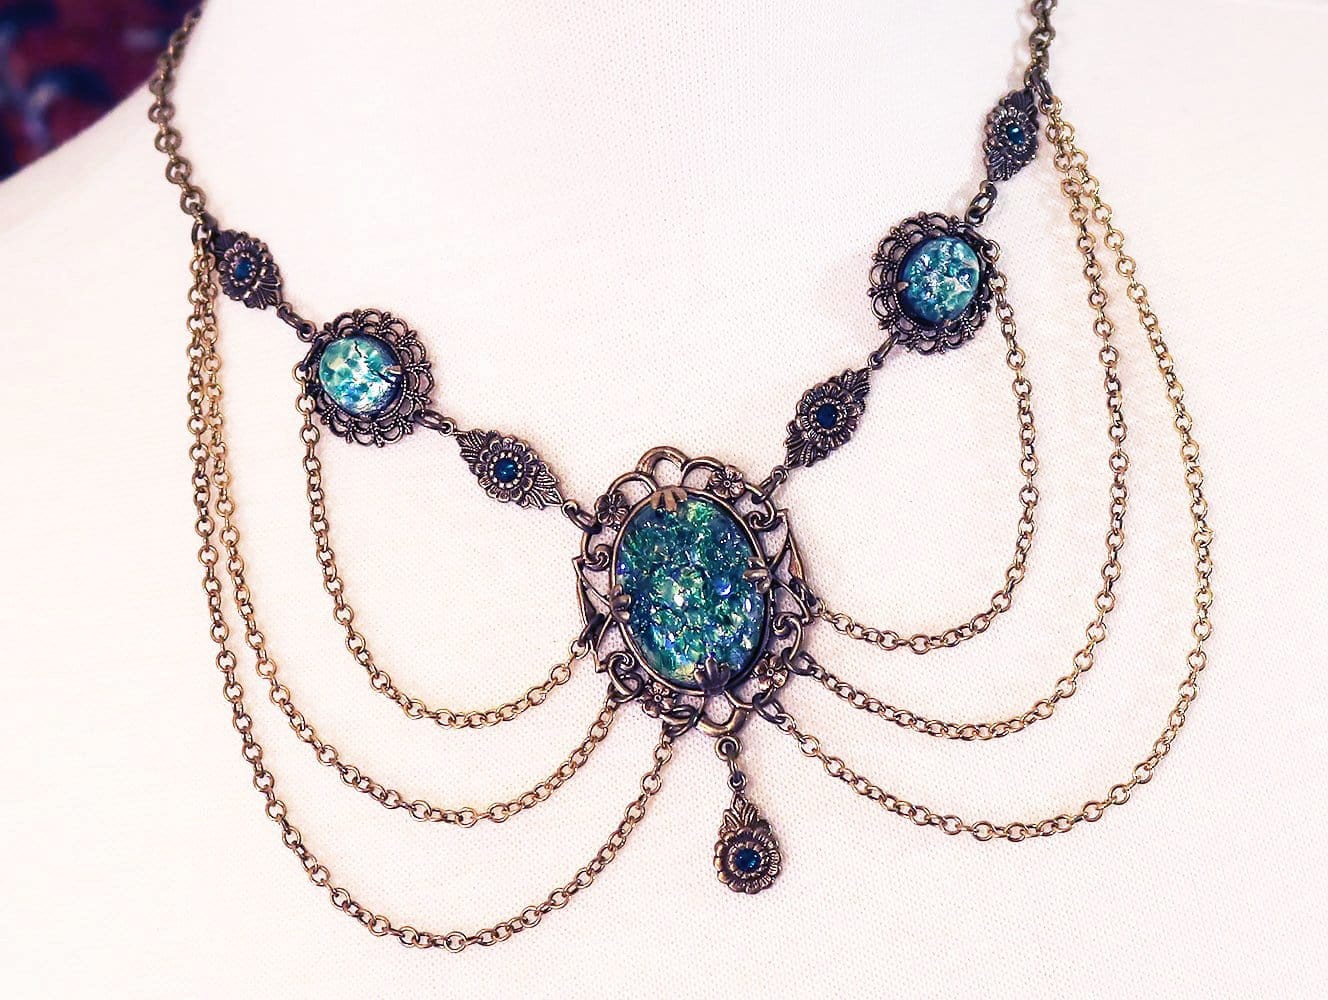 Drucilla Necklace in Emerald Opal and Antiqued Brass by Rabbitwood and Reason